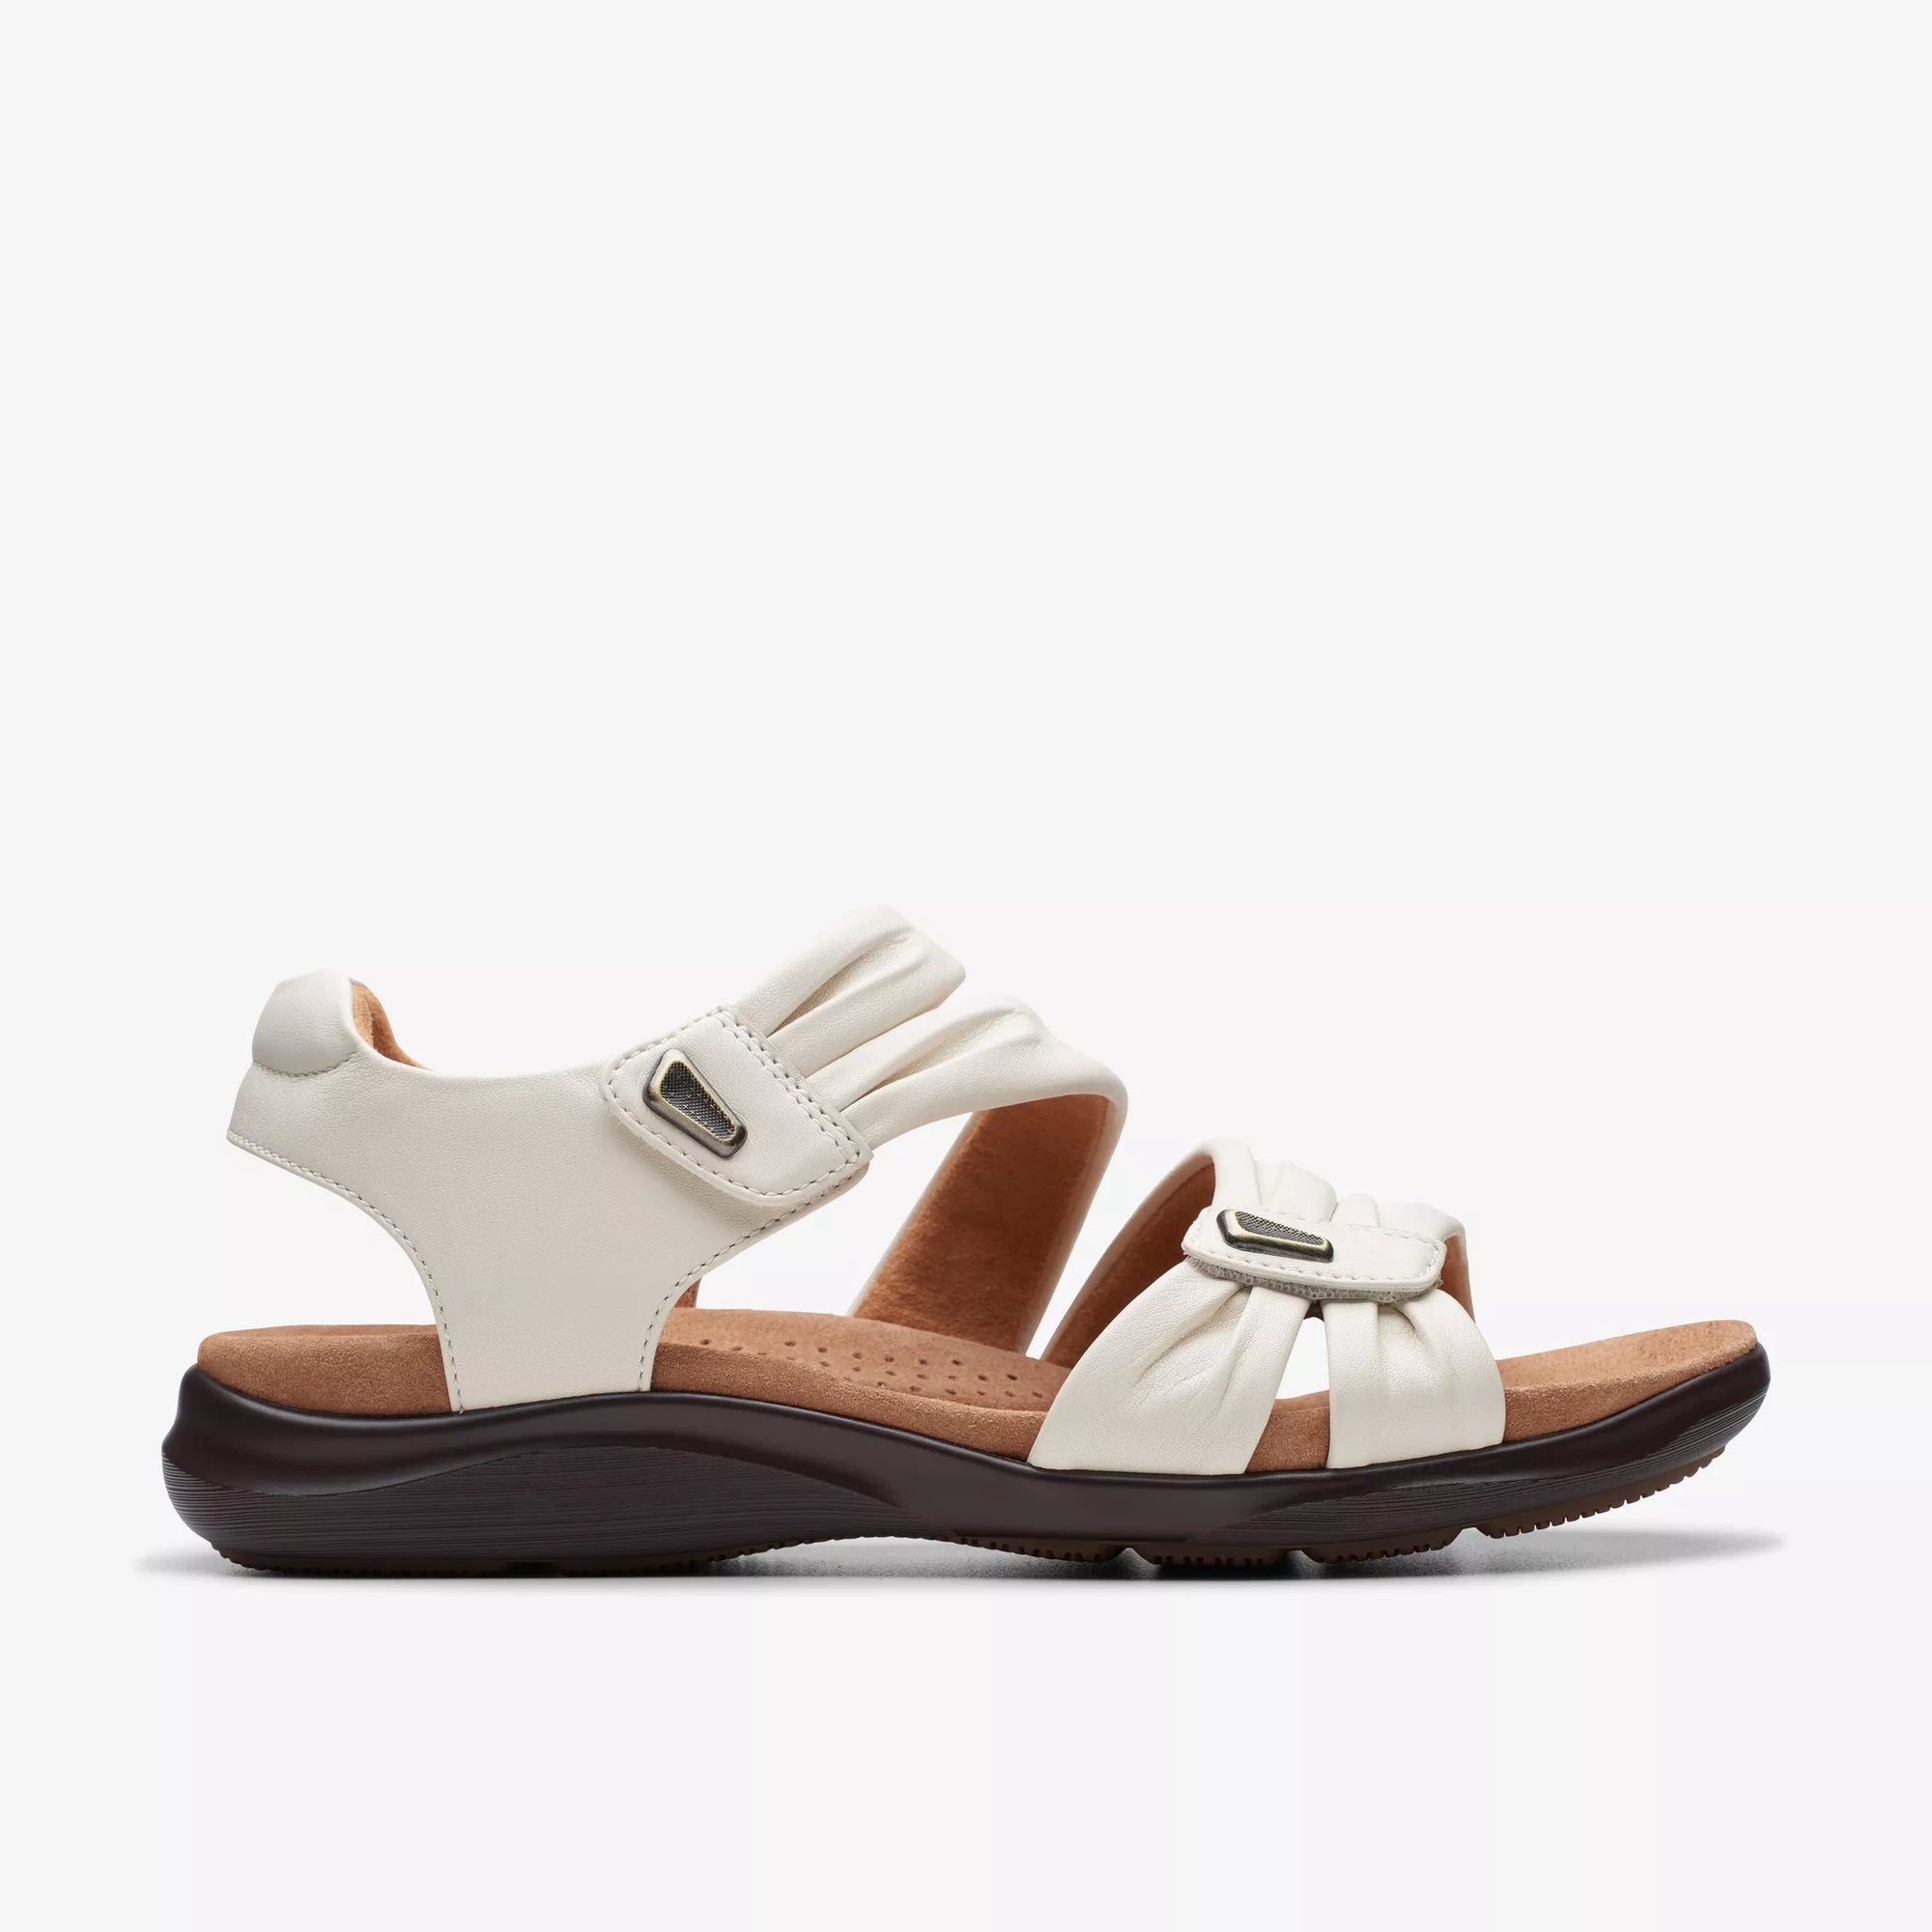 Clarks Women’s Kitly Ave Off White Leather